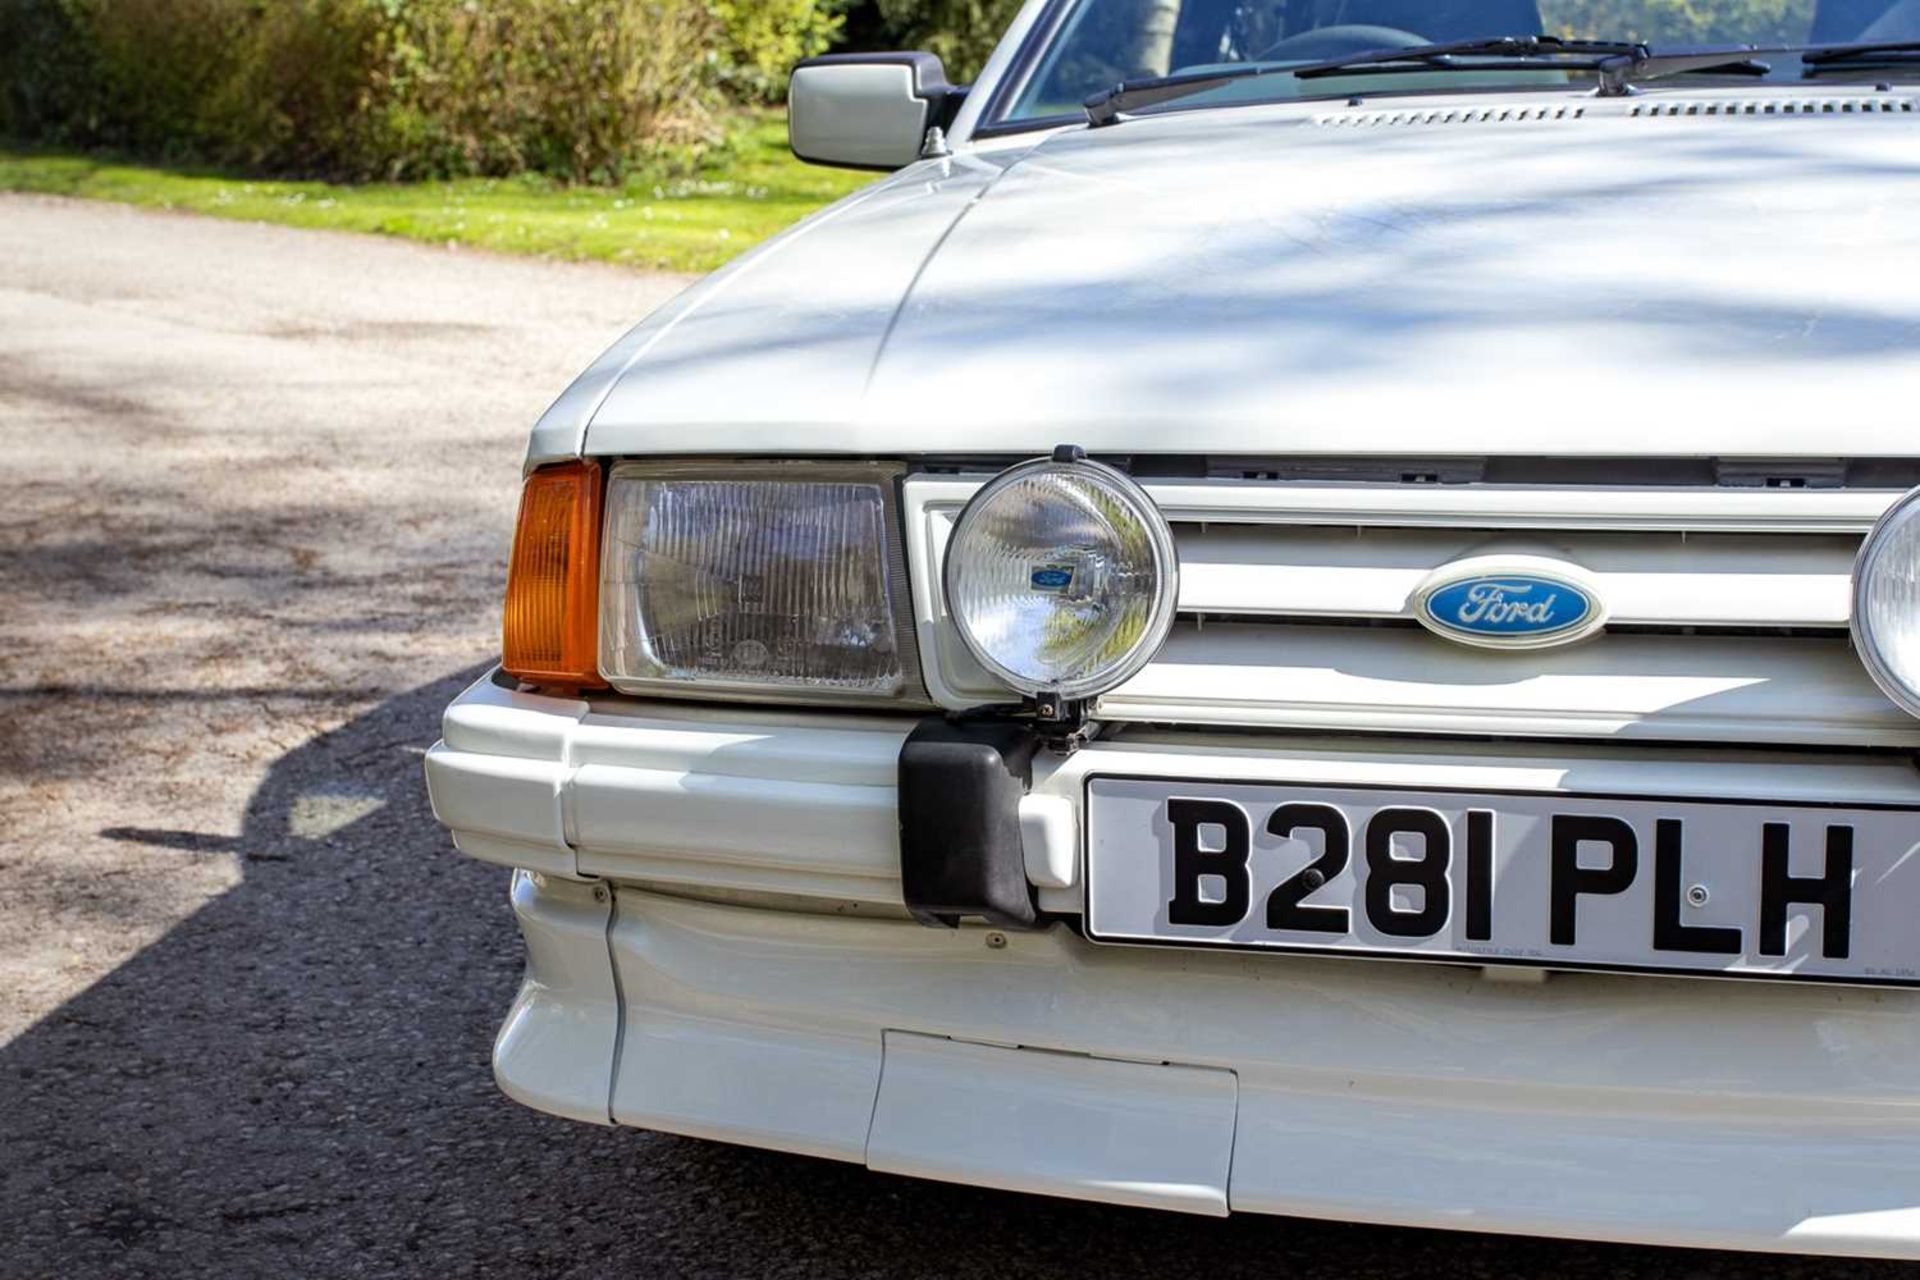 1985 Ford Escort RS Turbo S1 Subject to a full restoration  - Image 6 of 76